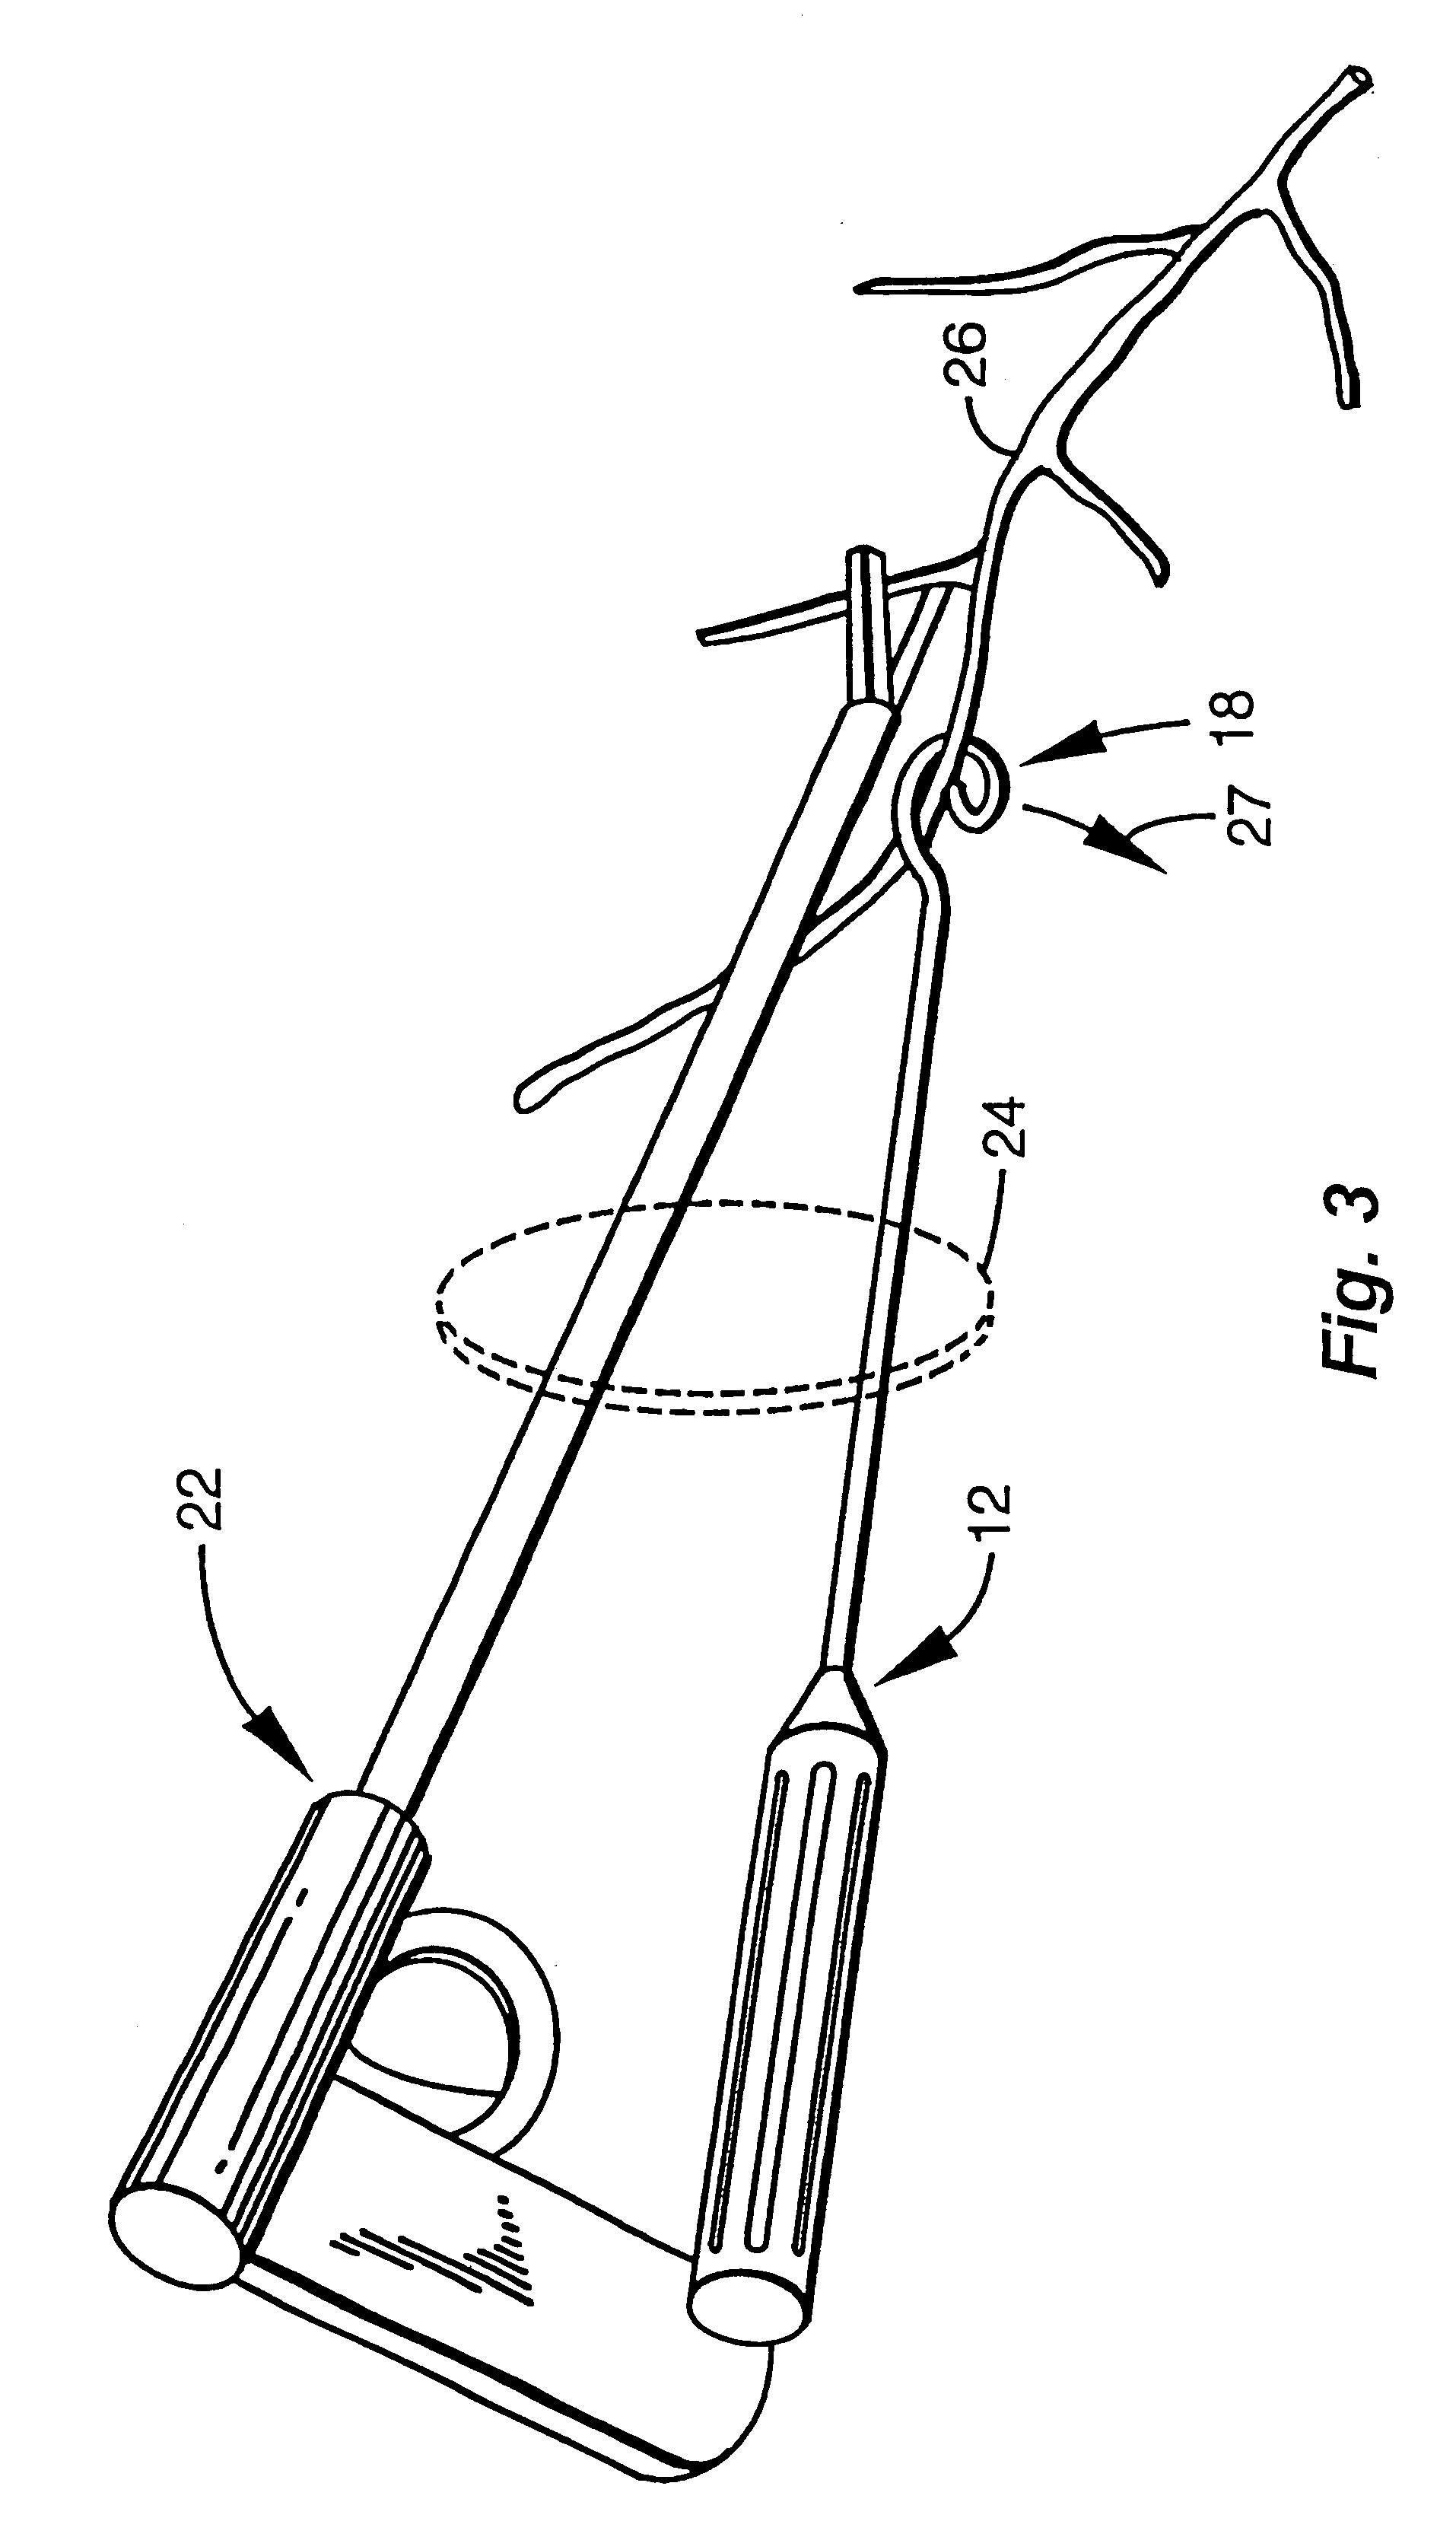 Surgical instrument for facilitating the detachment of an artery and the like